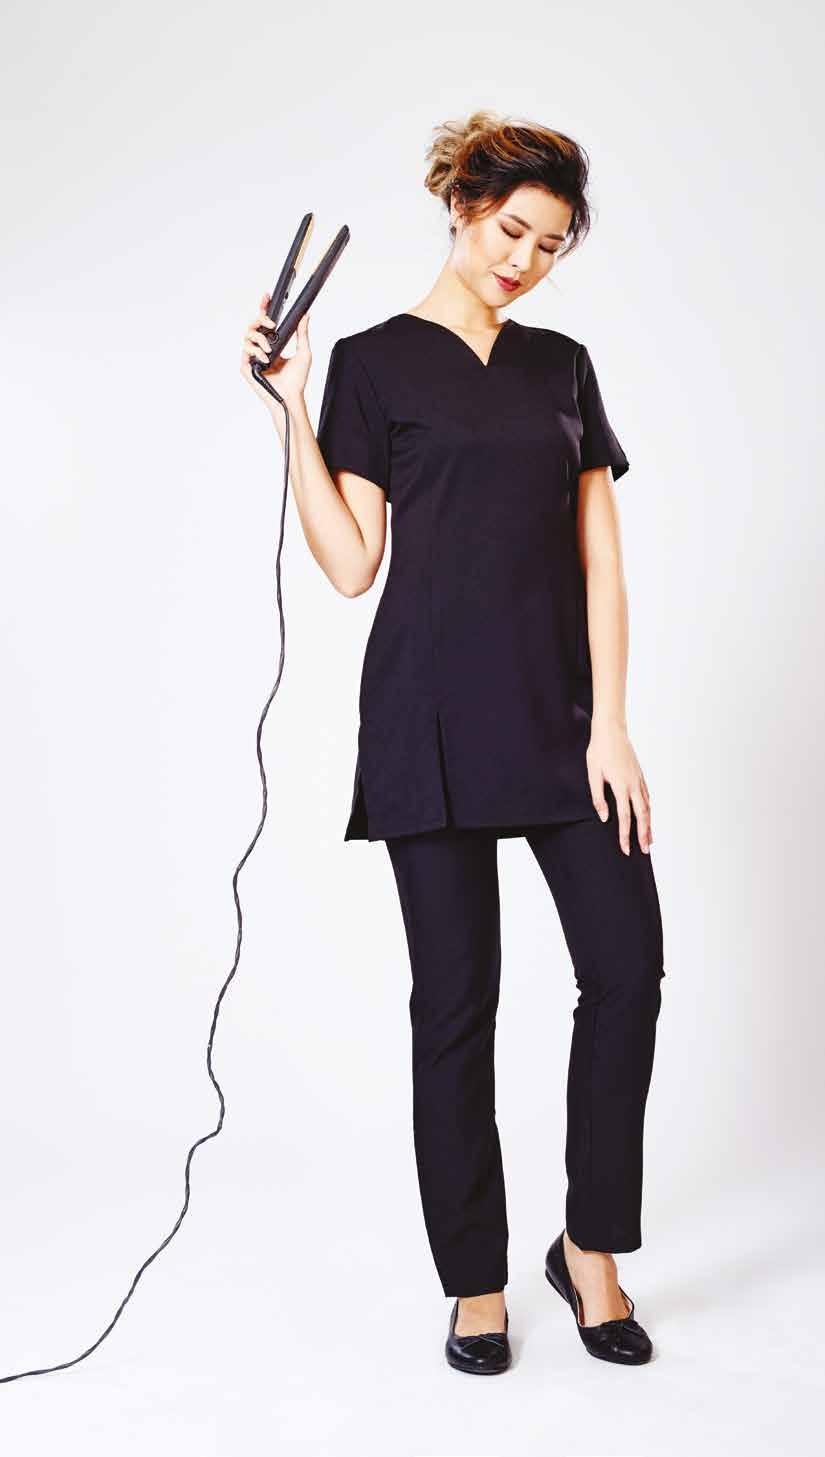 JASMIN Sleek and stylish, this long length tunic features front and side splits for easy movement.